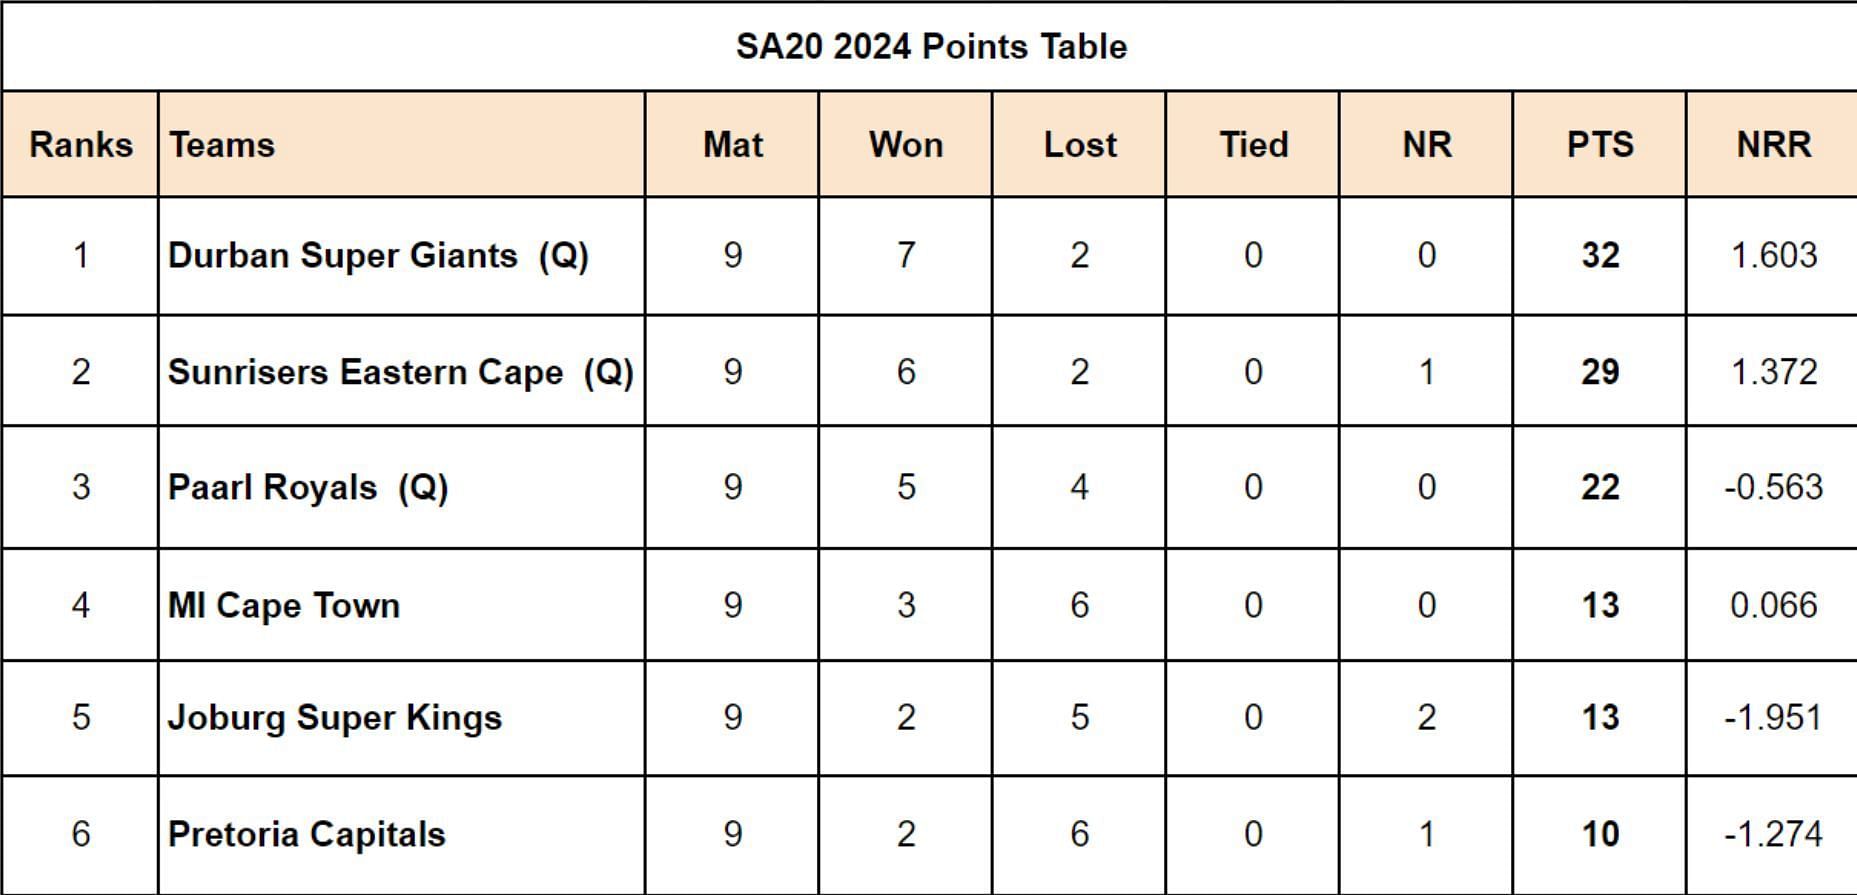 SA20 2024 Points Table Updated after Match 27